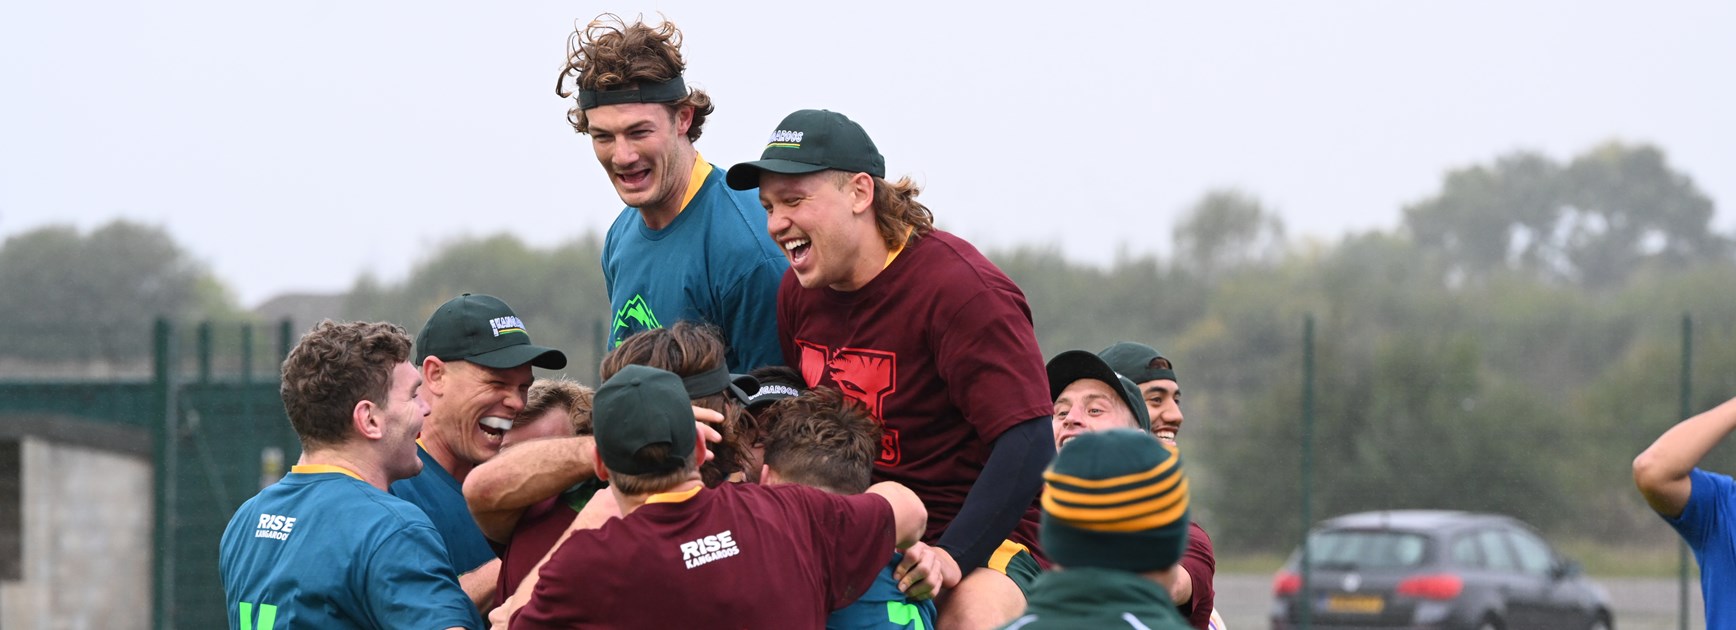 Kangaroos players are pushing each other to strive for success